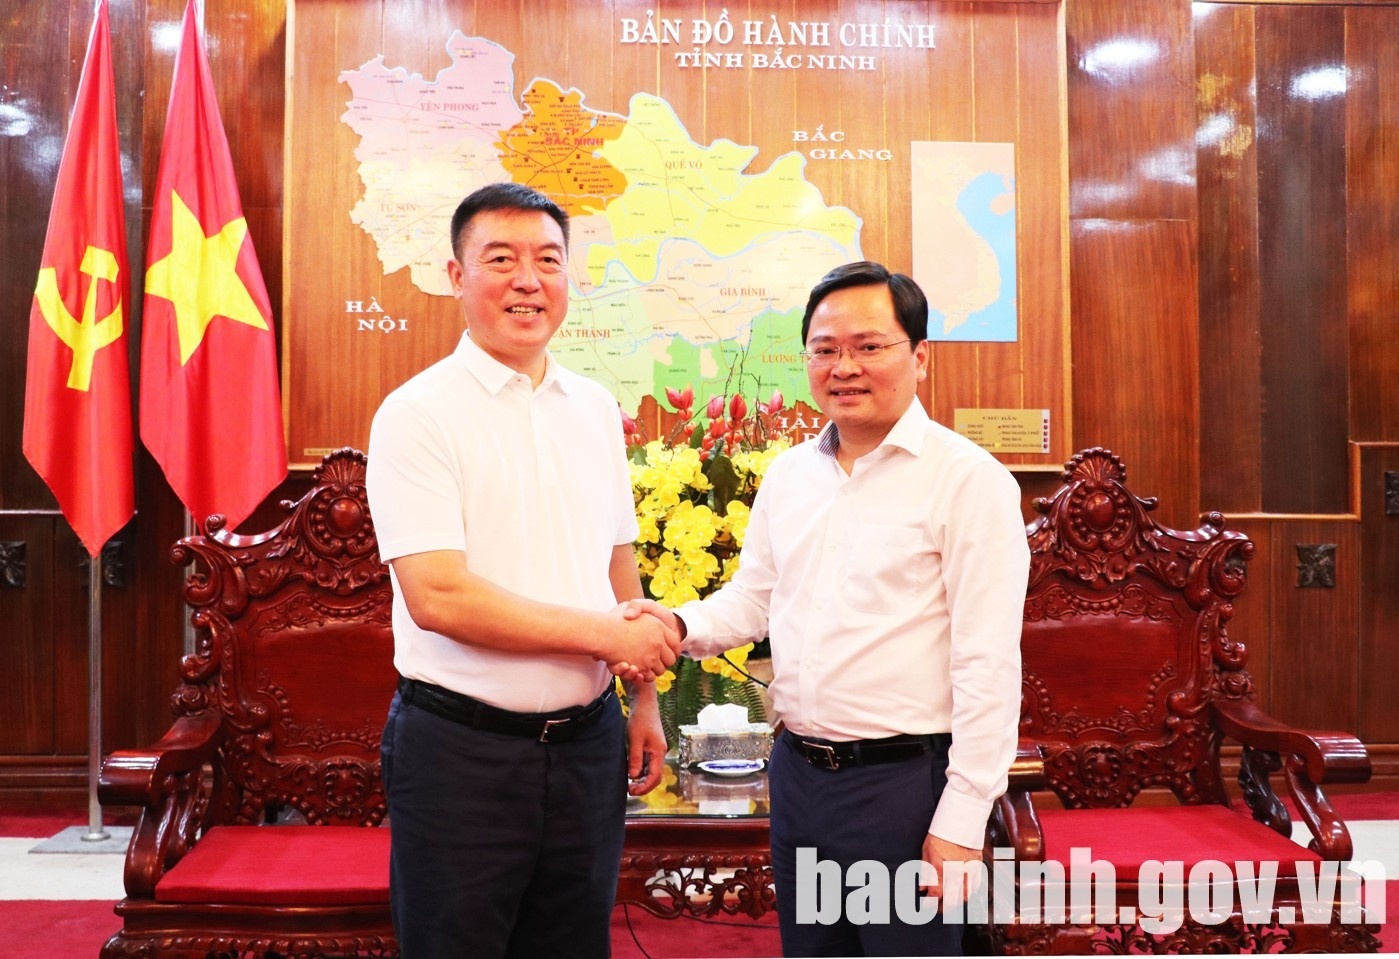 victory giant technology to develop 400 million electronics components factory in bac ninh